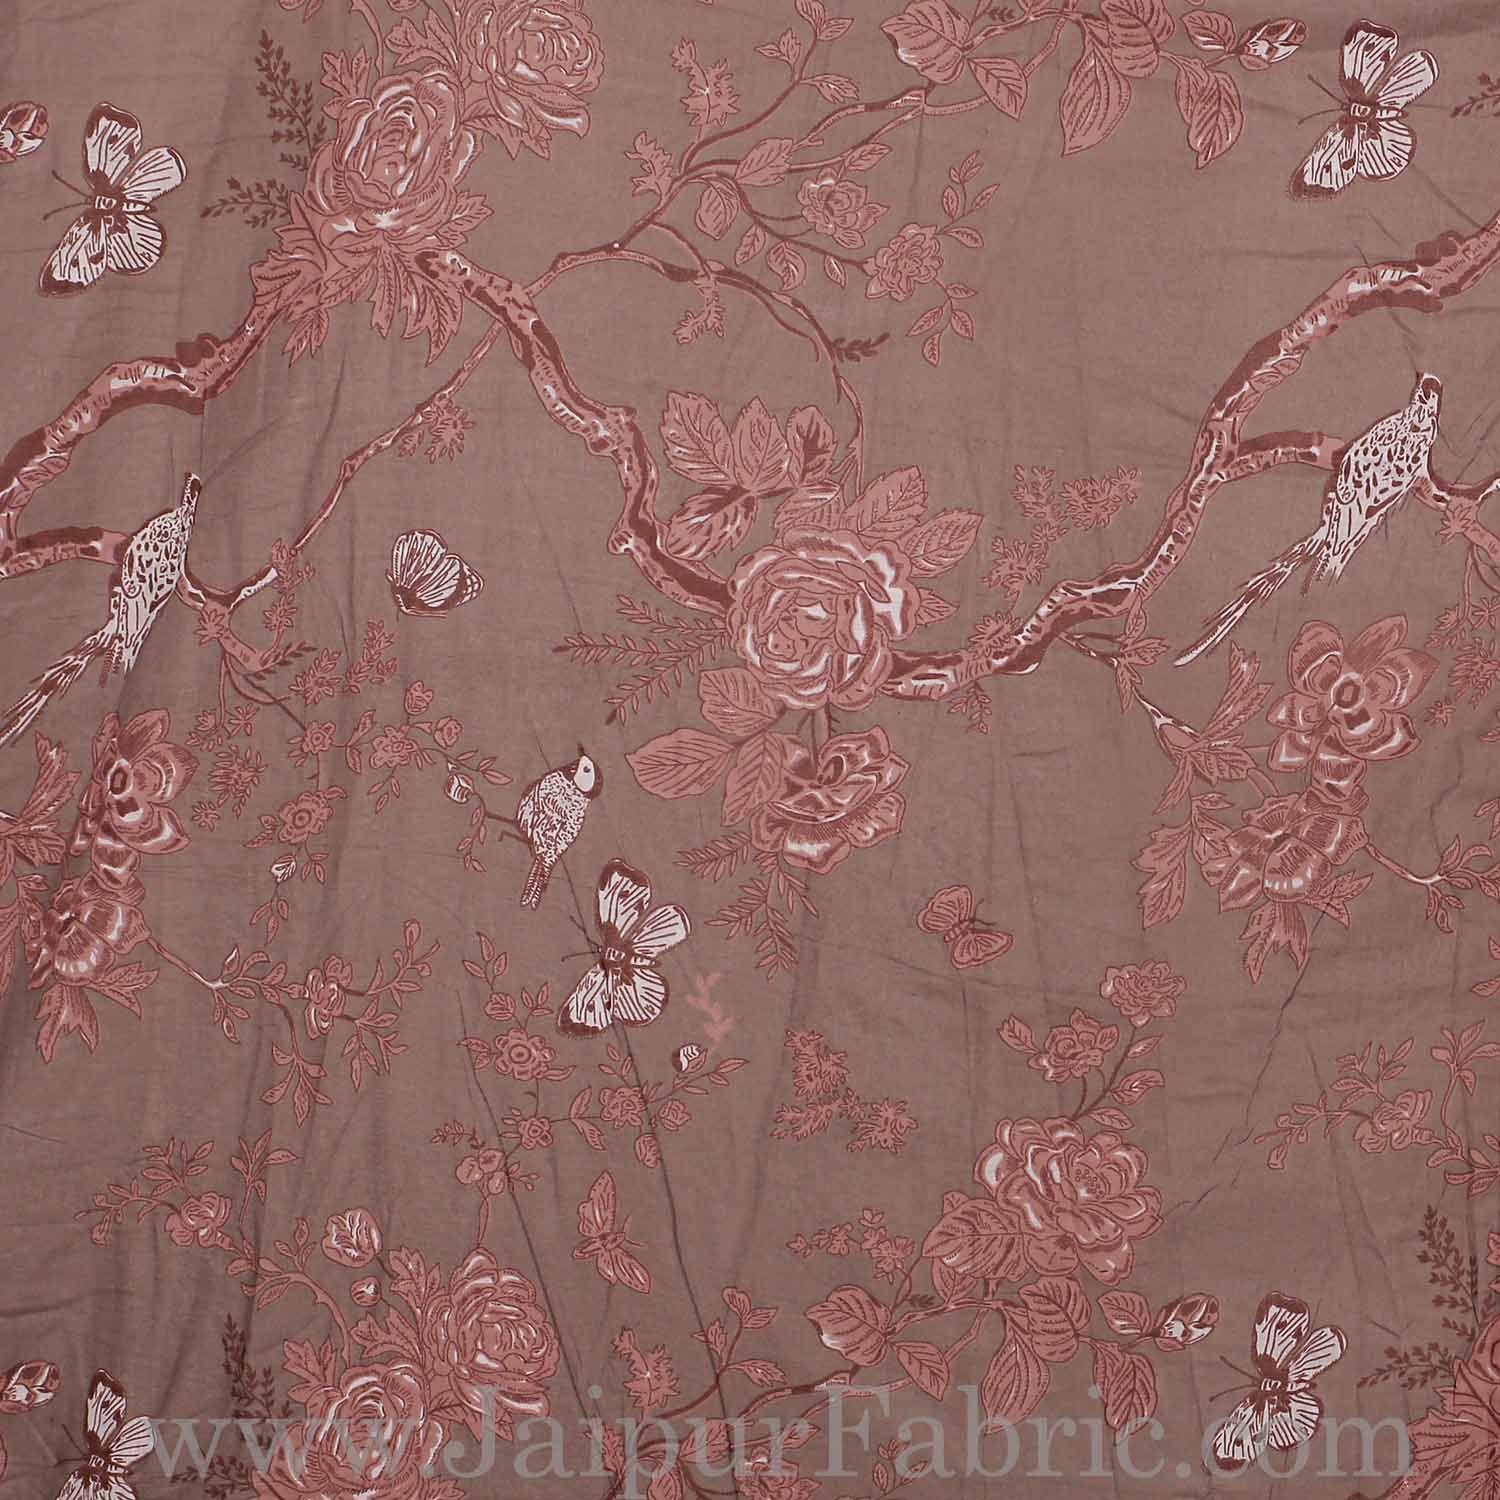 Muslin Cotton Double bed Reversible mulmul Dohar in concrete grey with pink floral design